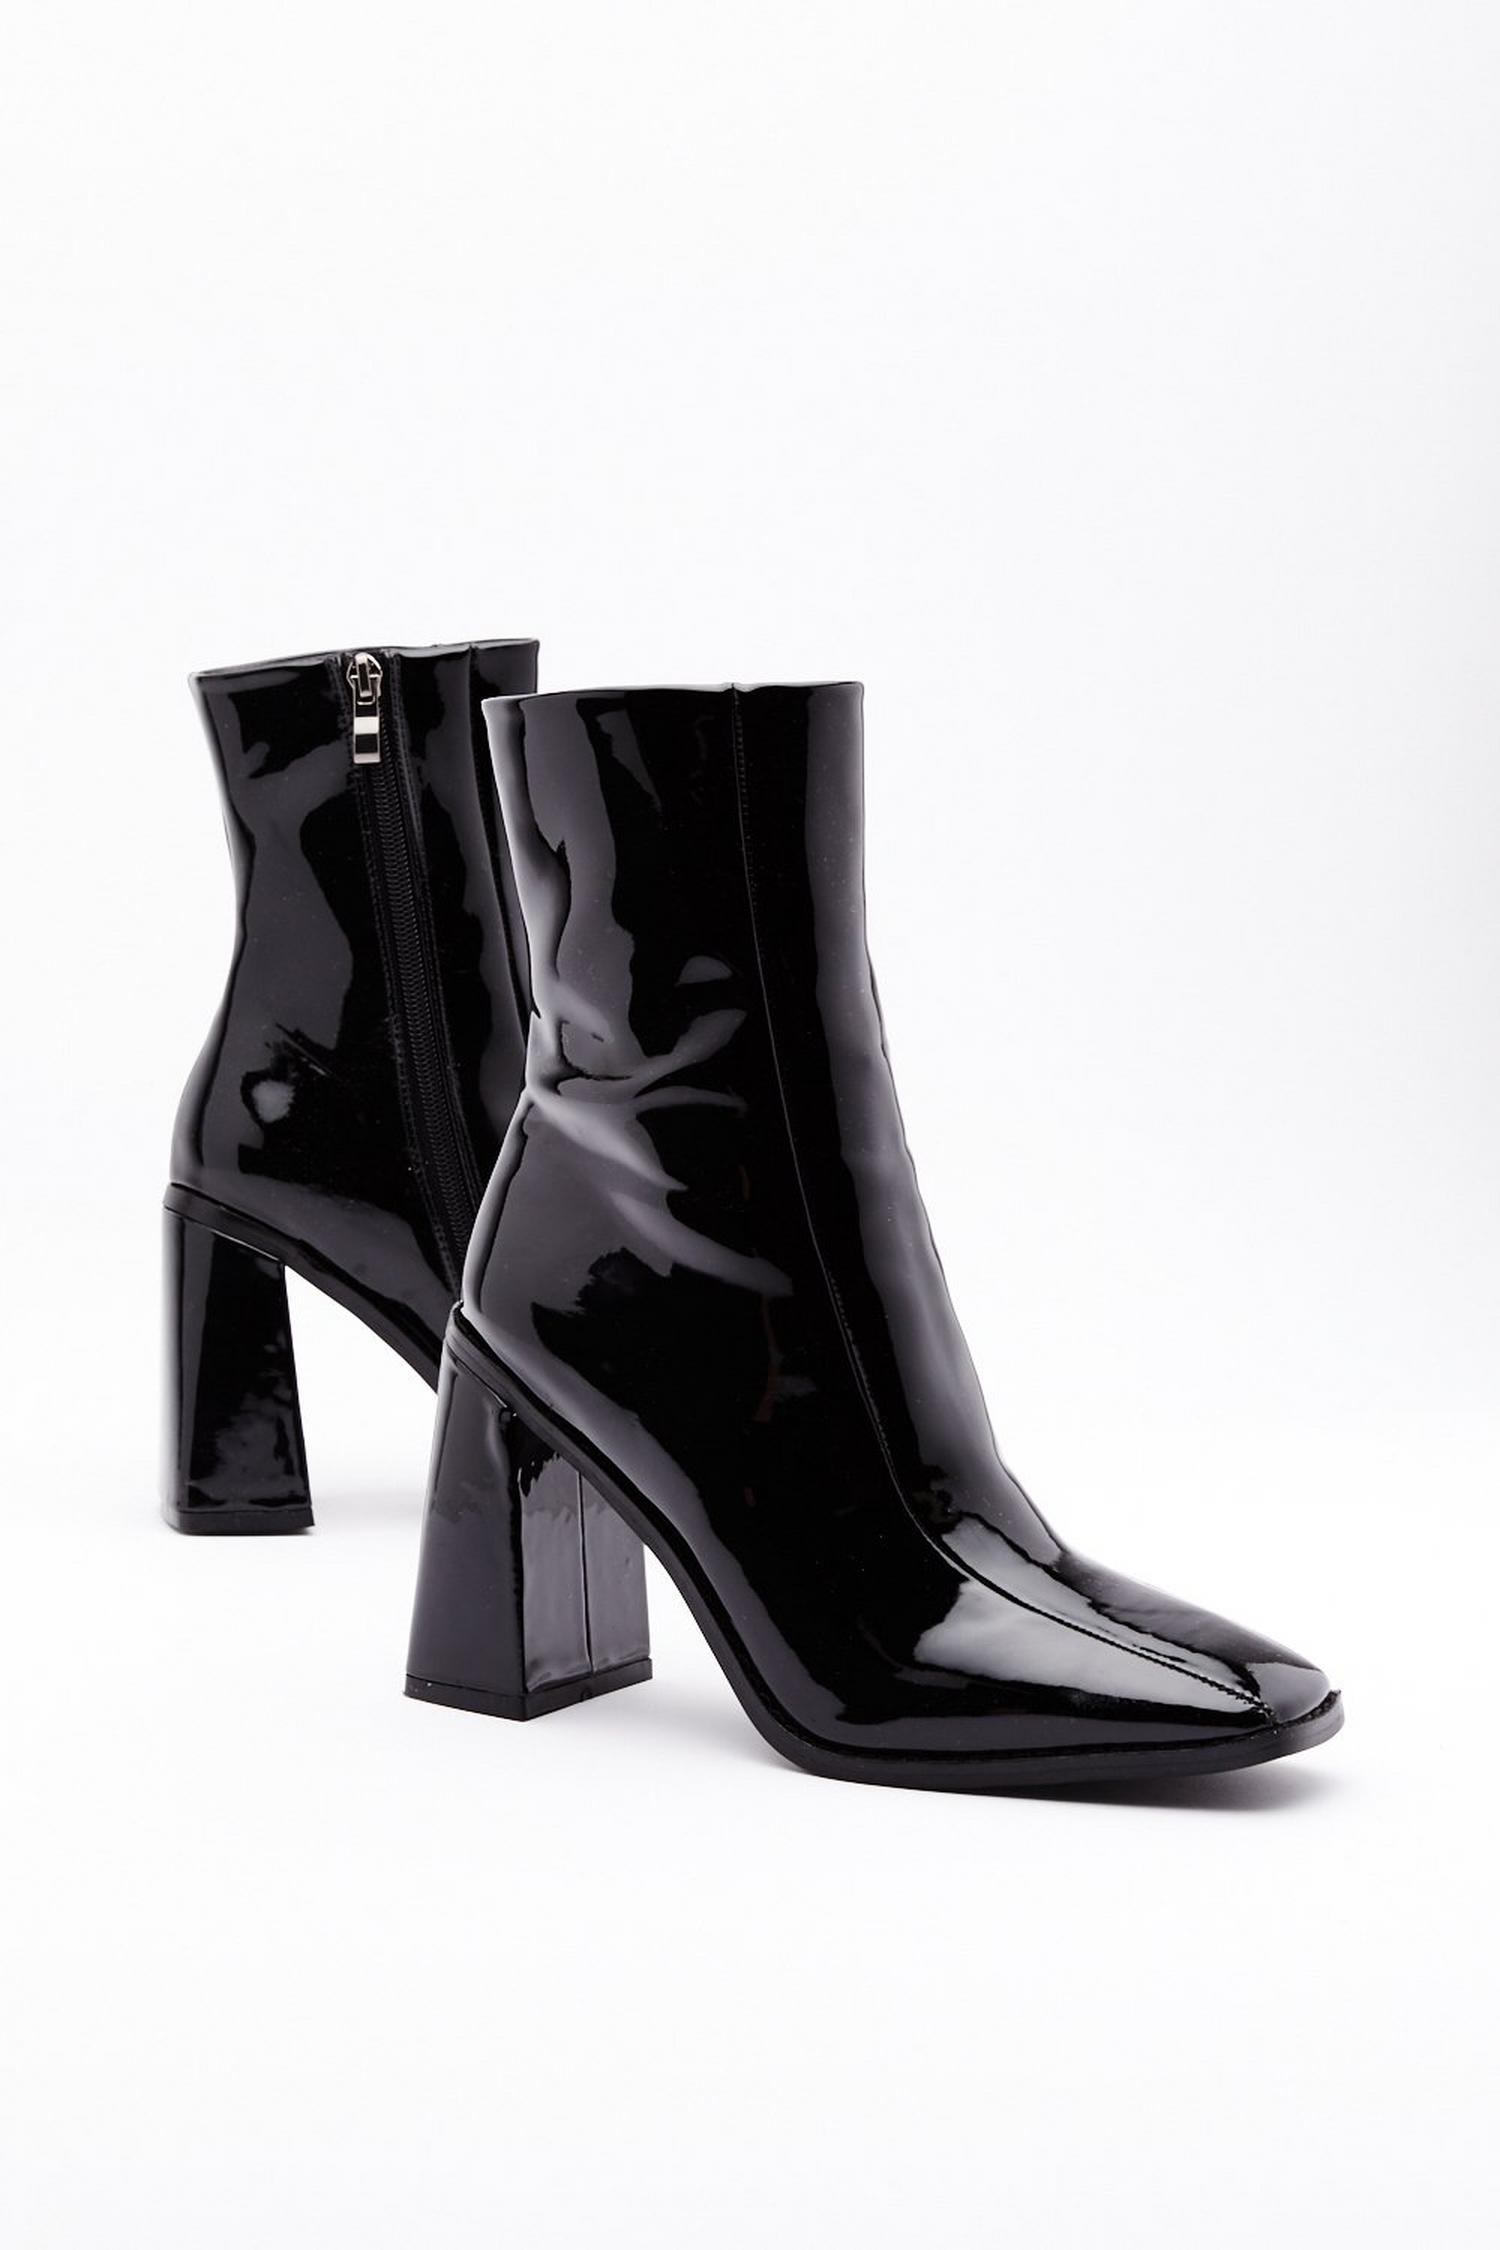 Patent Square Toe Flare Heel Boots | Nasty Gal